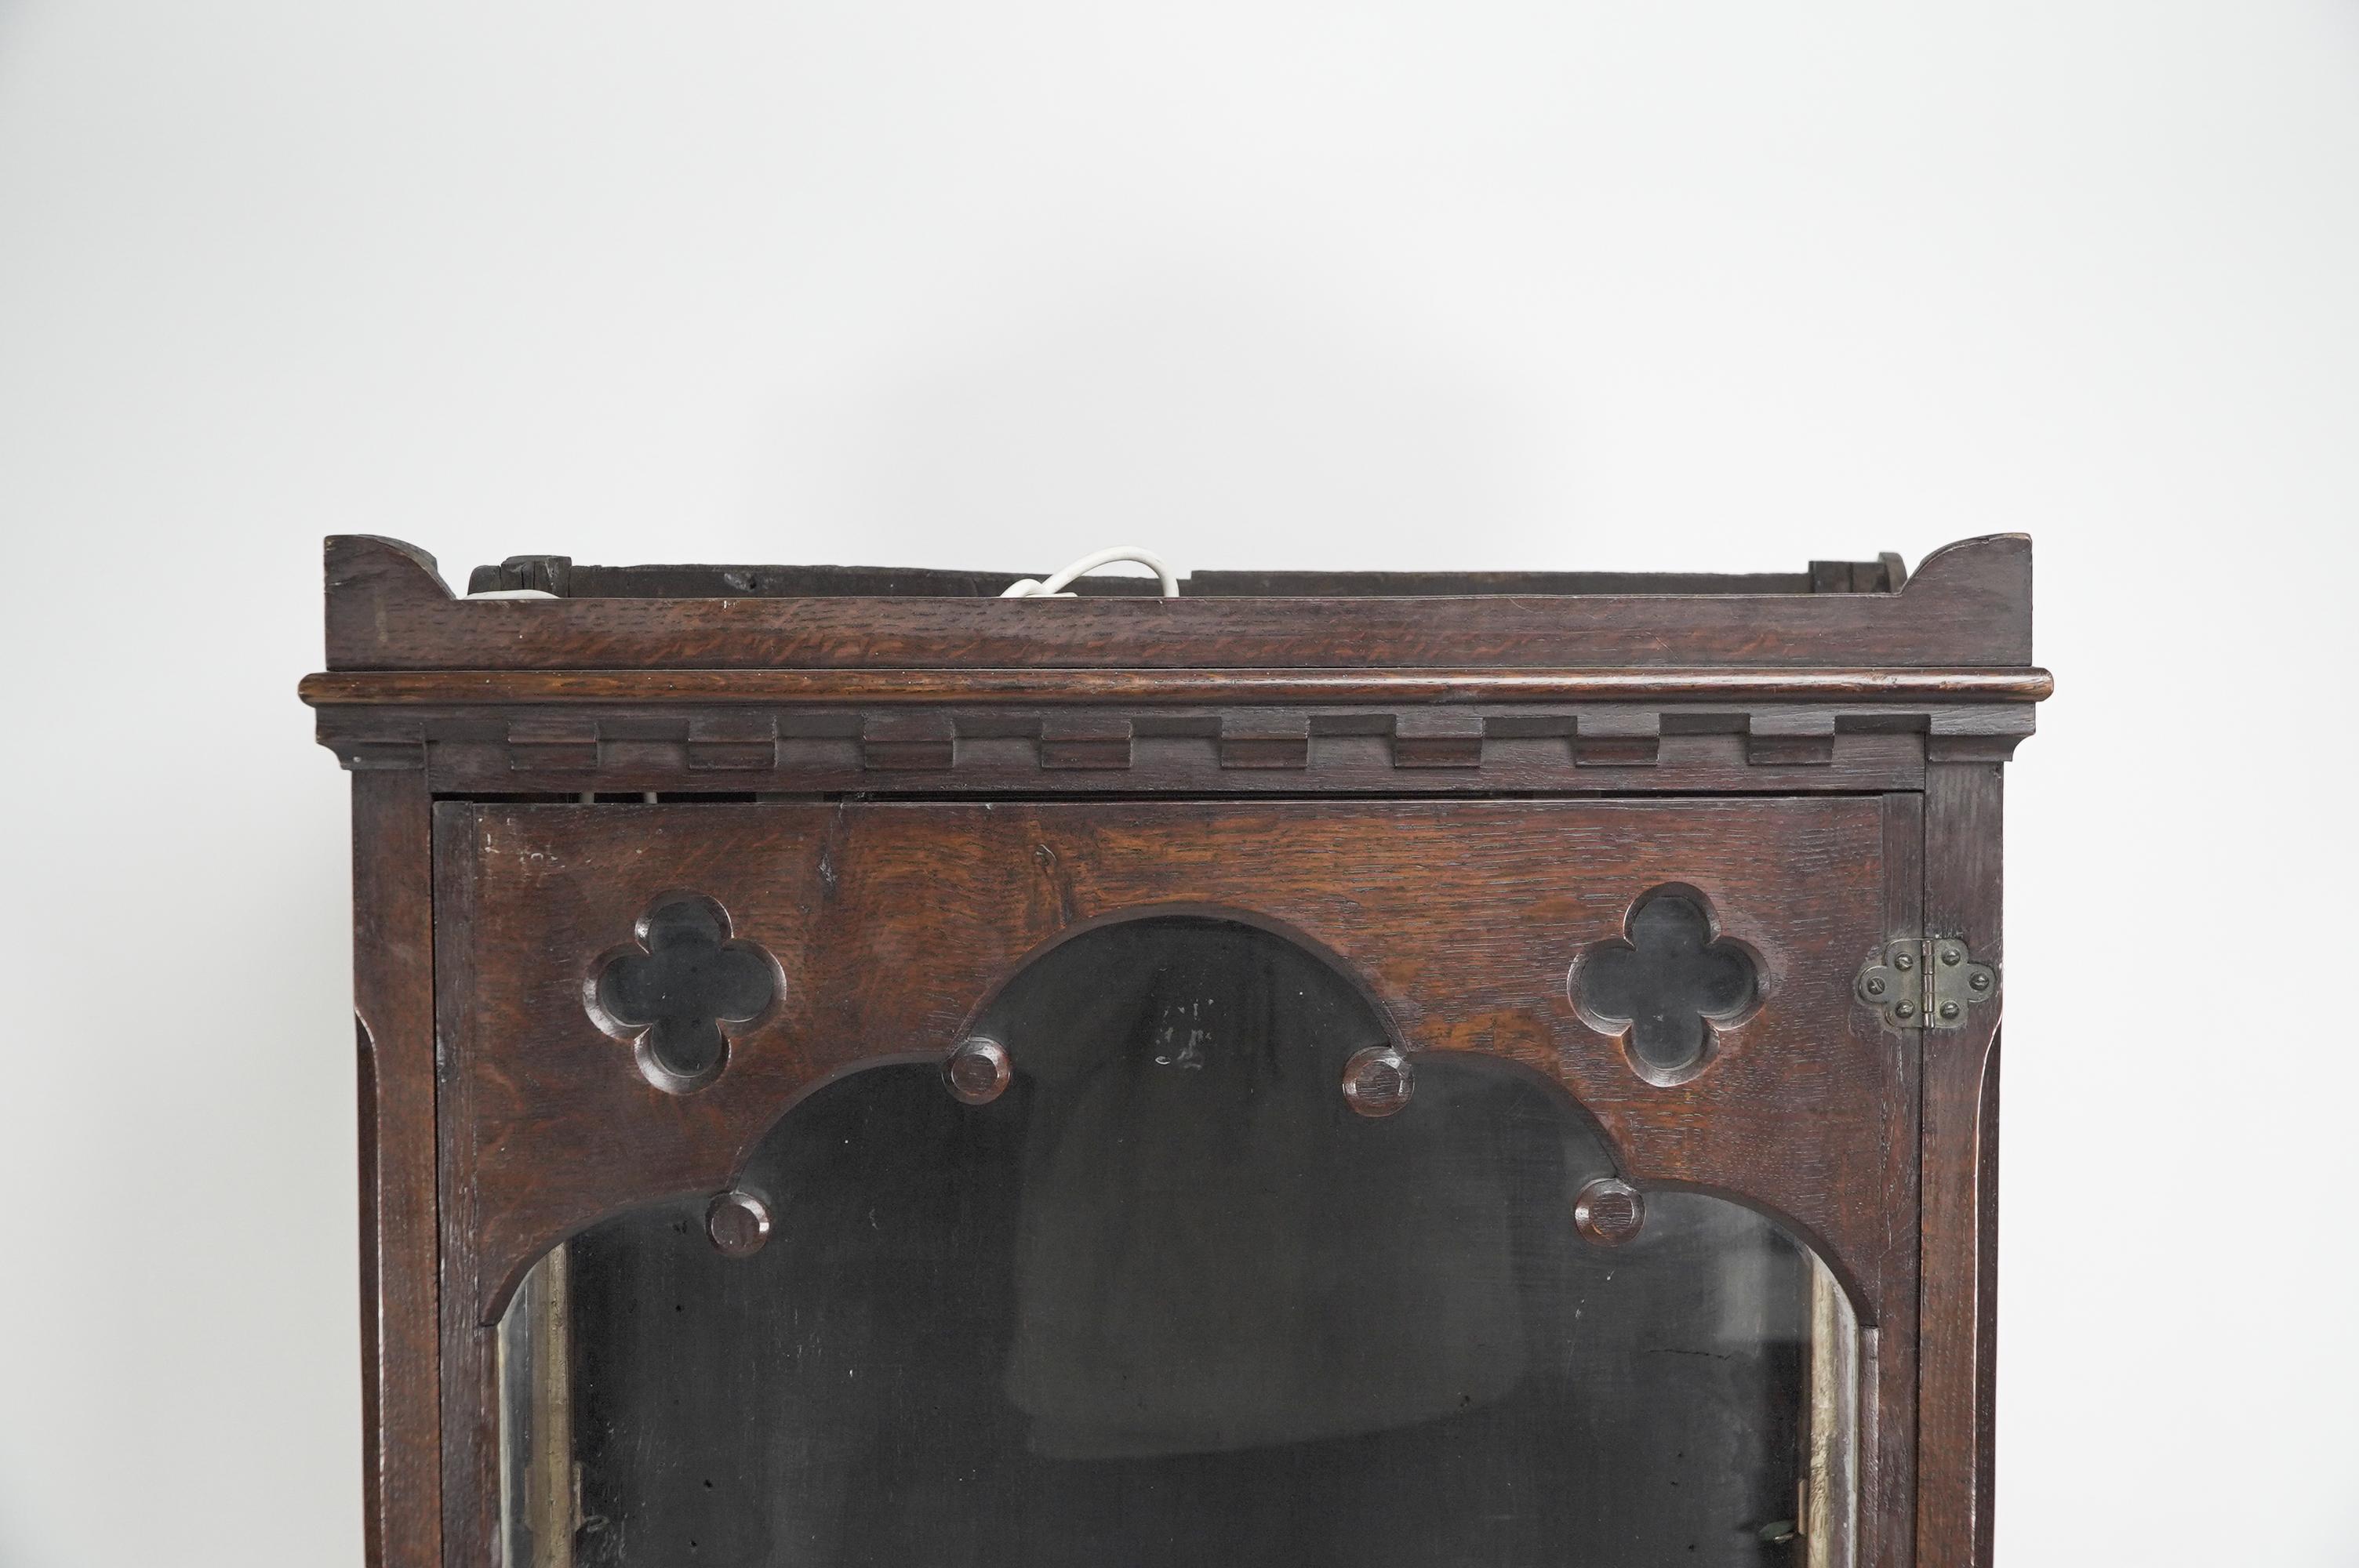 English Gothic Revival oak display cabinet with arch & quatrefoil decoration on a stand. For Sale